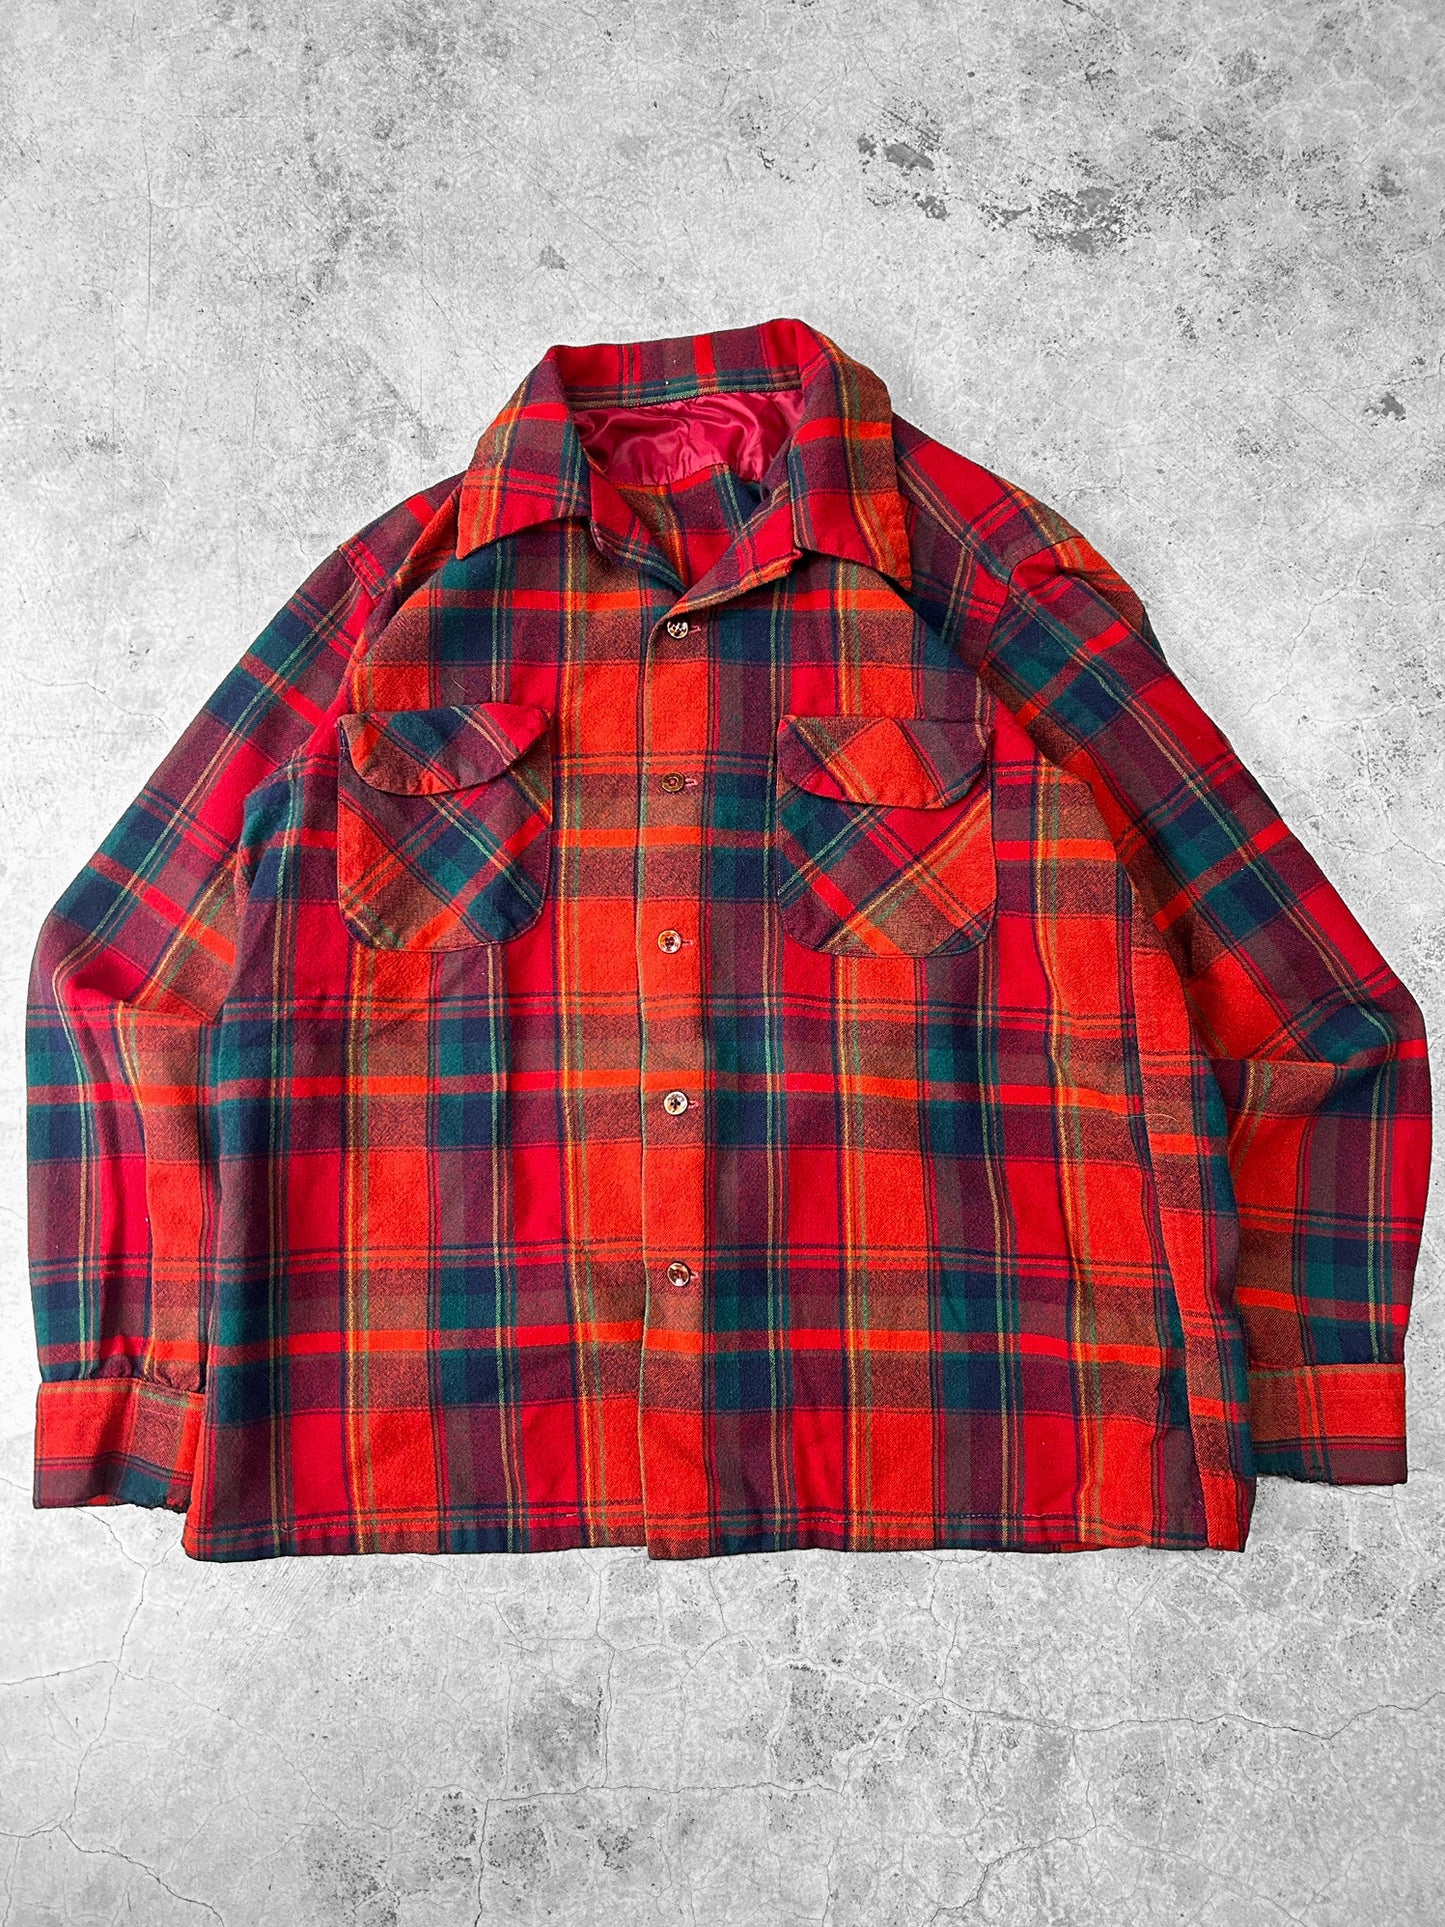 Pendelton Wool Blend Button-Up Red and Orange Flannel - M